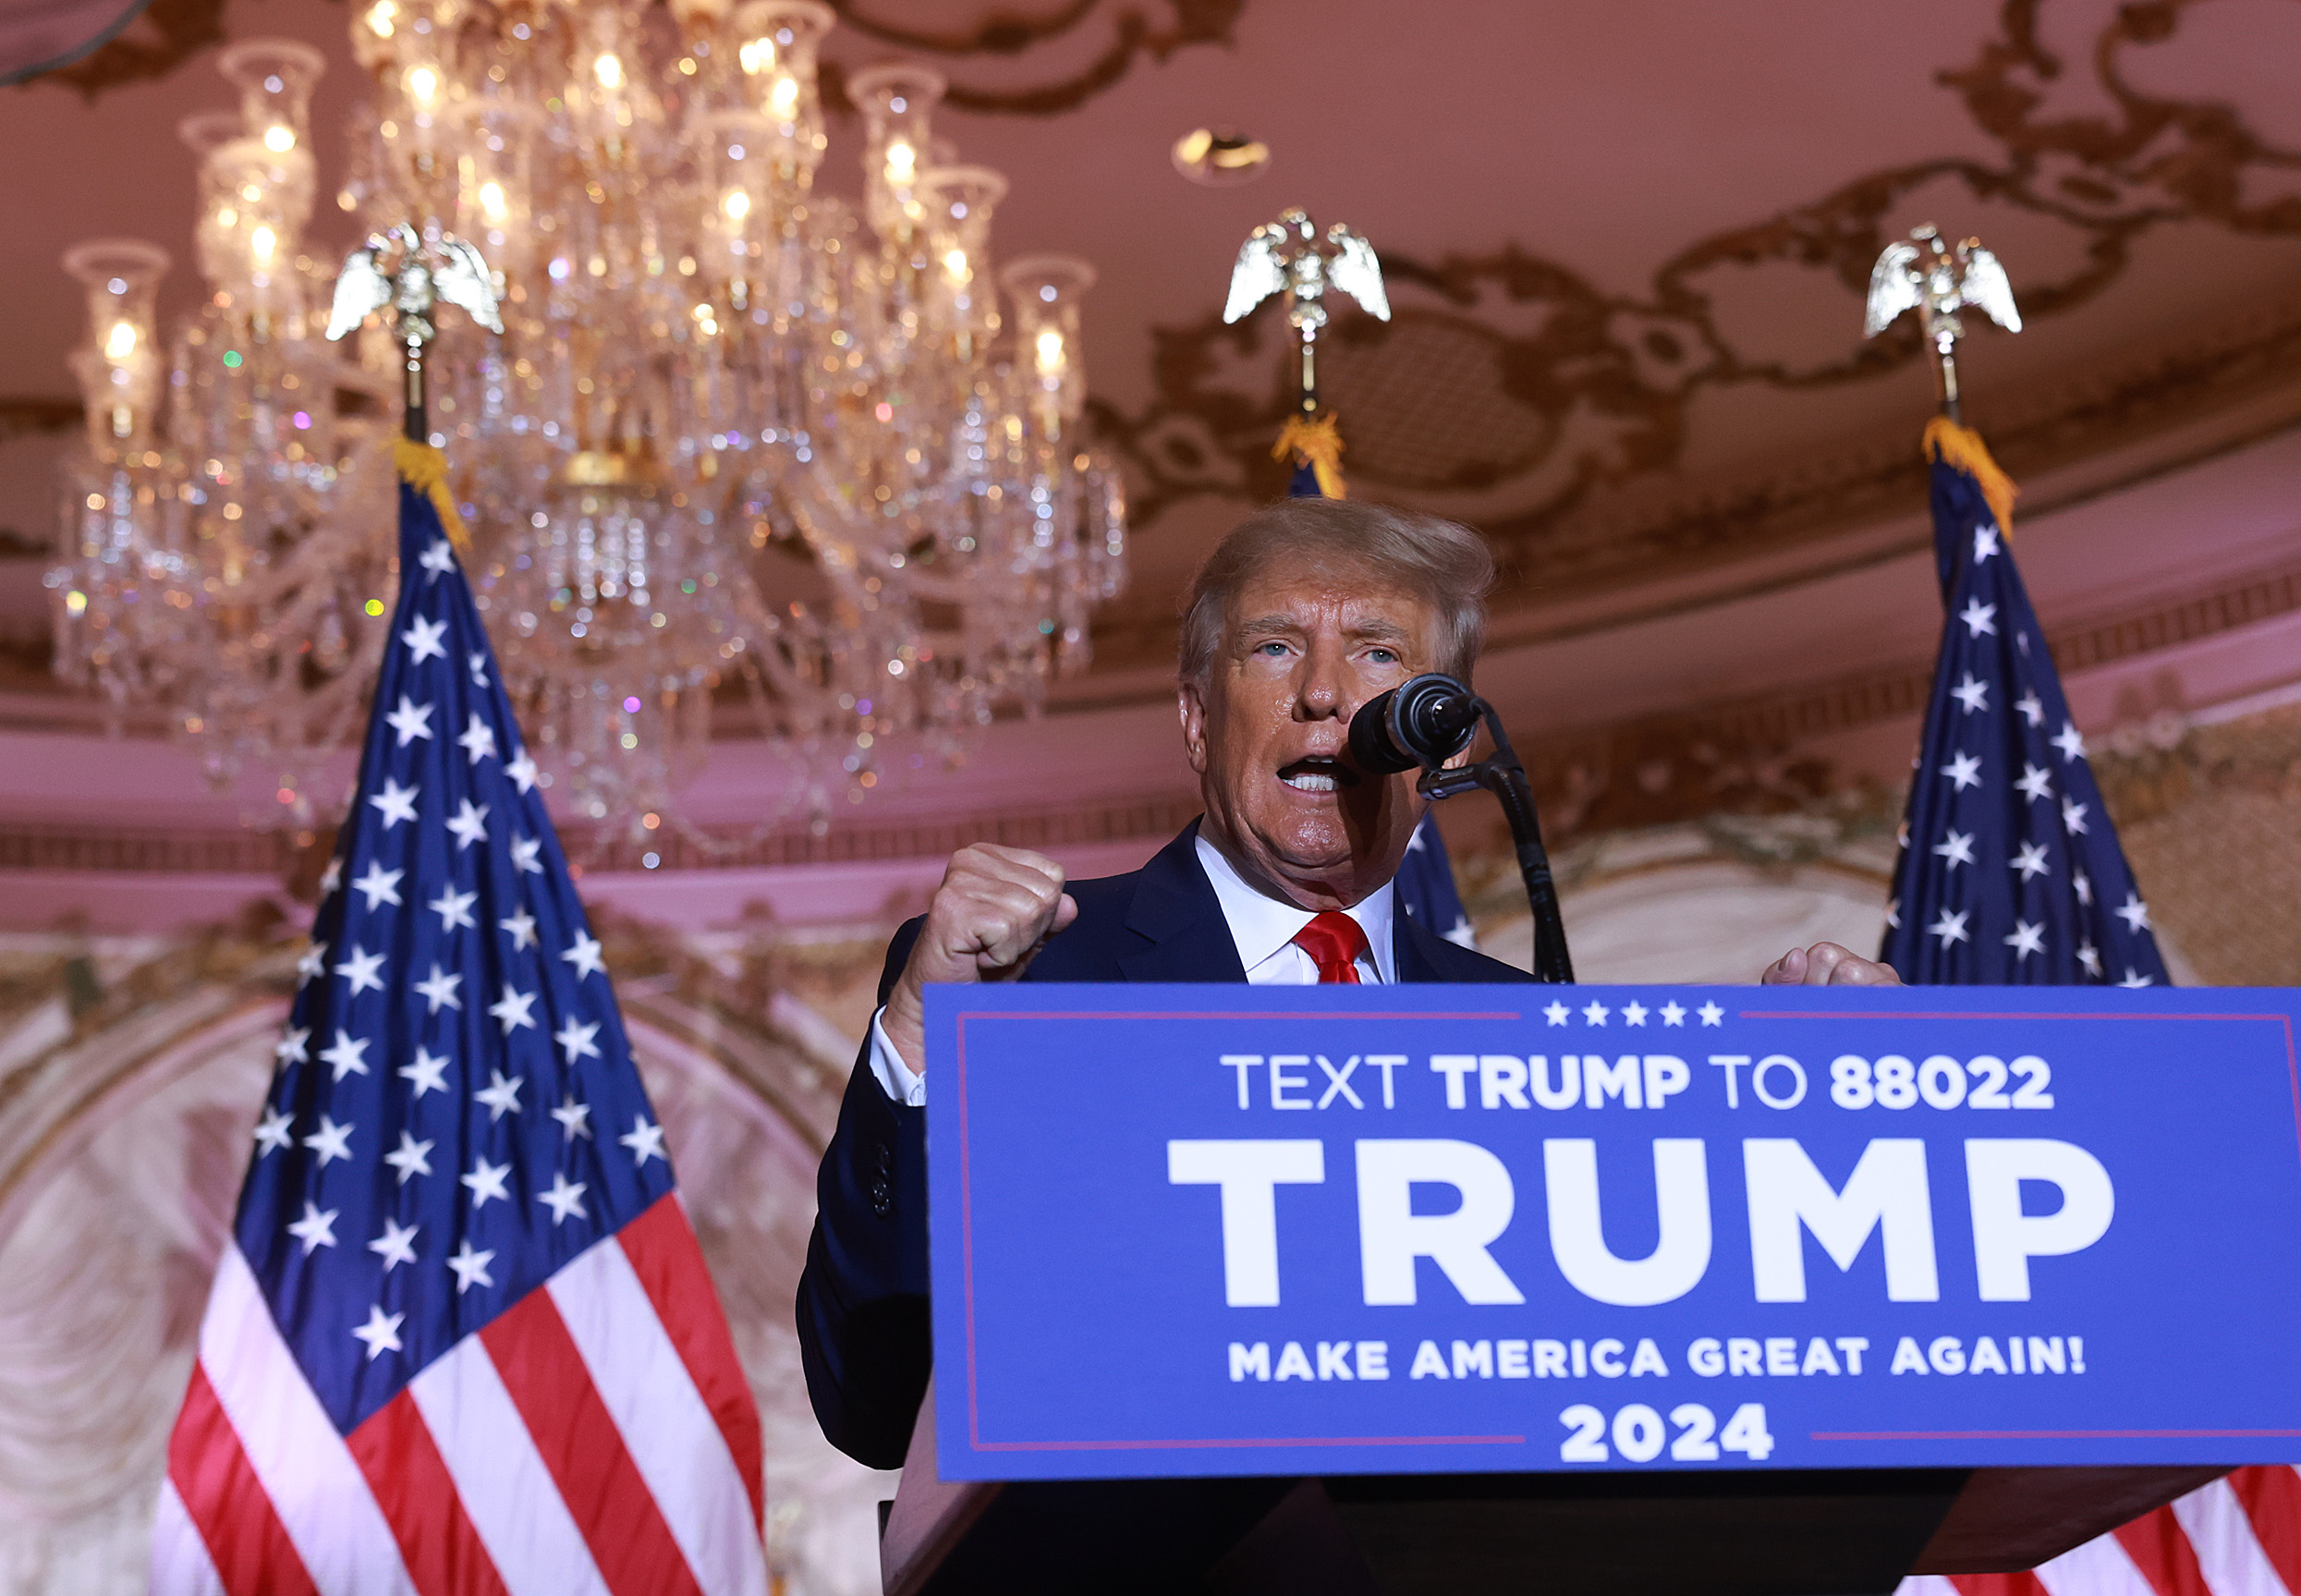 Donald Trump's 2024 Campaign Completely Unraveled in Just a Few Days